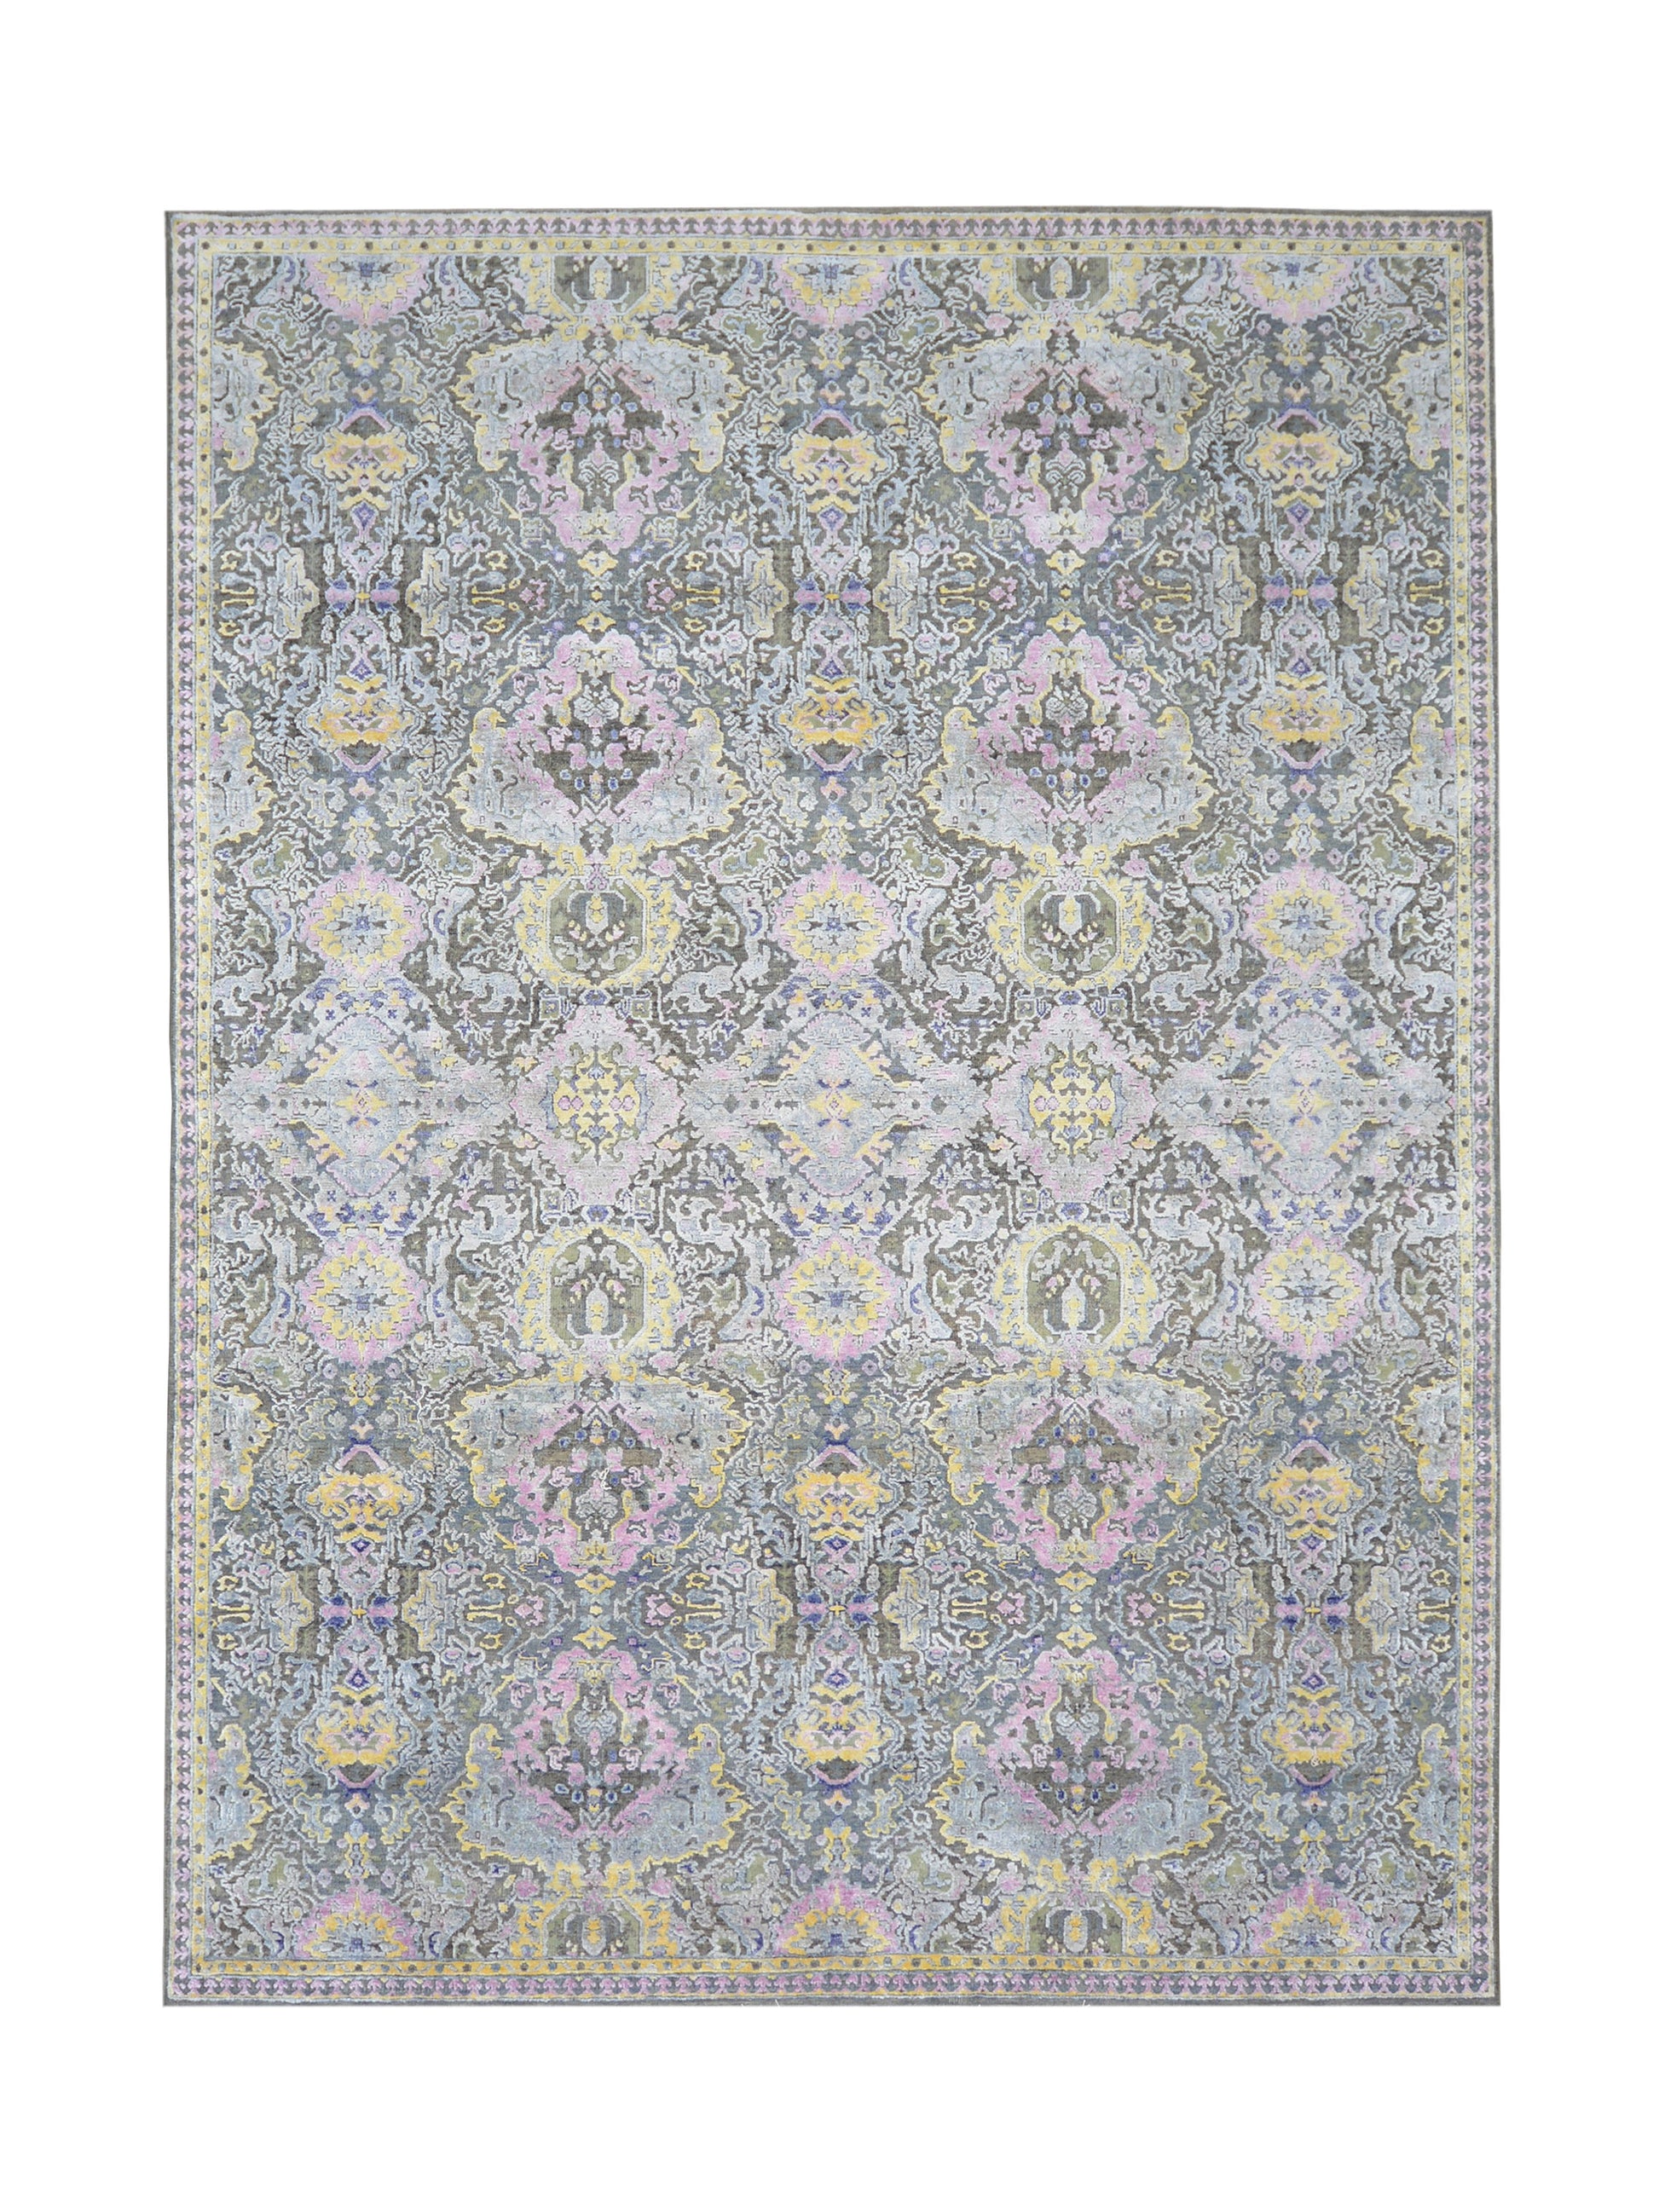 Get trendy with Grey & Pink Viscose & Wool Contemporary Handknotted Area Rug 8.8x11.11ft 263x363Cms - Contemporary Rugs available at Jaipur Oriental Rugs. Grab yours for $4340.00 today!